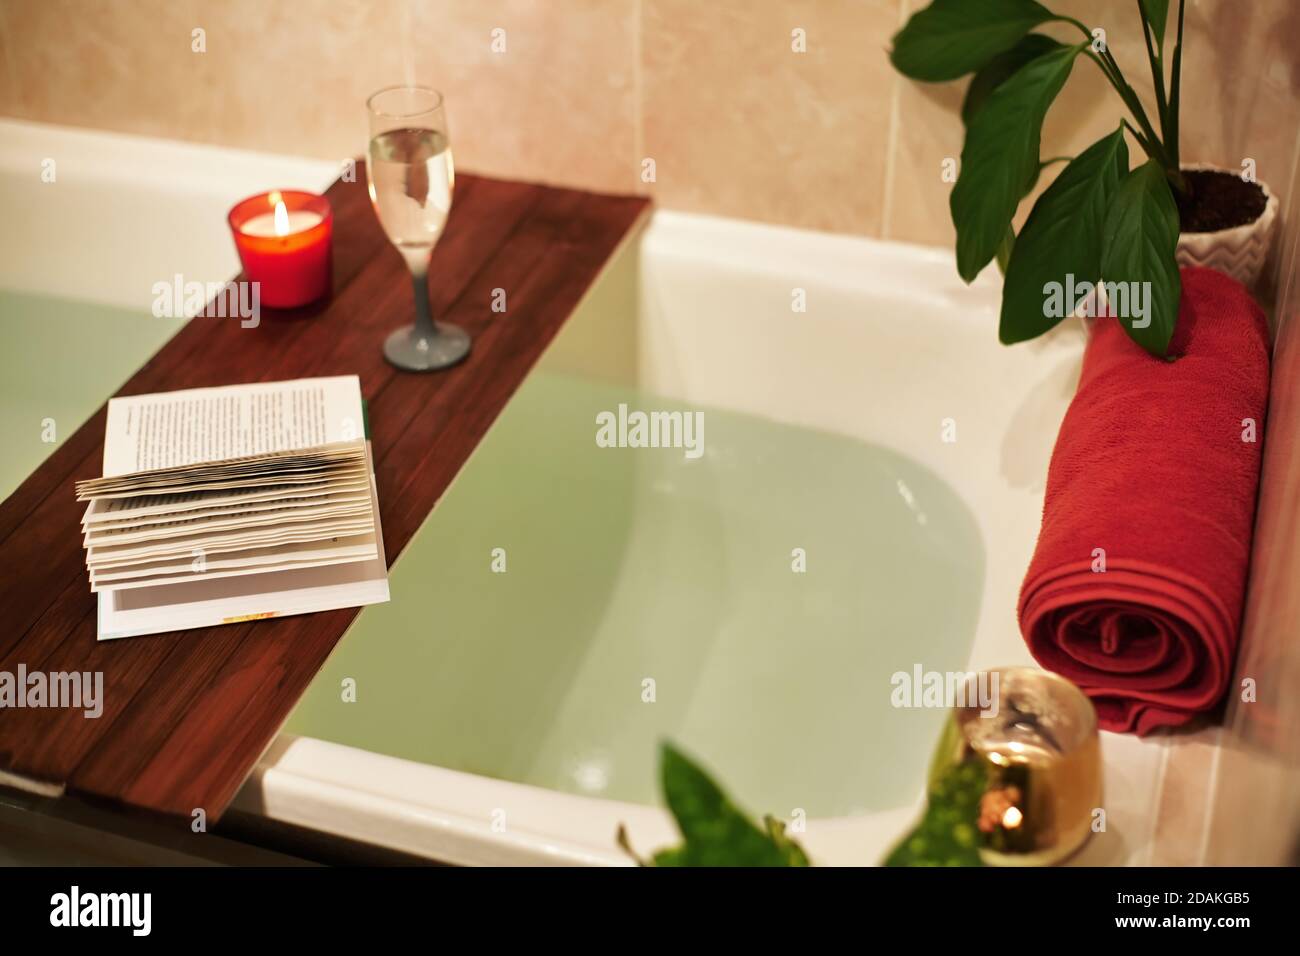 https://c8.alamy.com/comp/2DAKGB5/time-for-yourself-relax-at-home-bath-tub-with-flower-petals-book-candles-and-glass-of-wine-on-a-wood-tray-organic-spa-relaxation-in-comfort-cozy-2DAKGB5.jpg